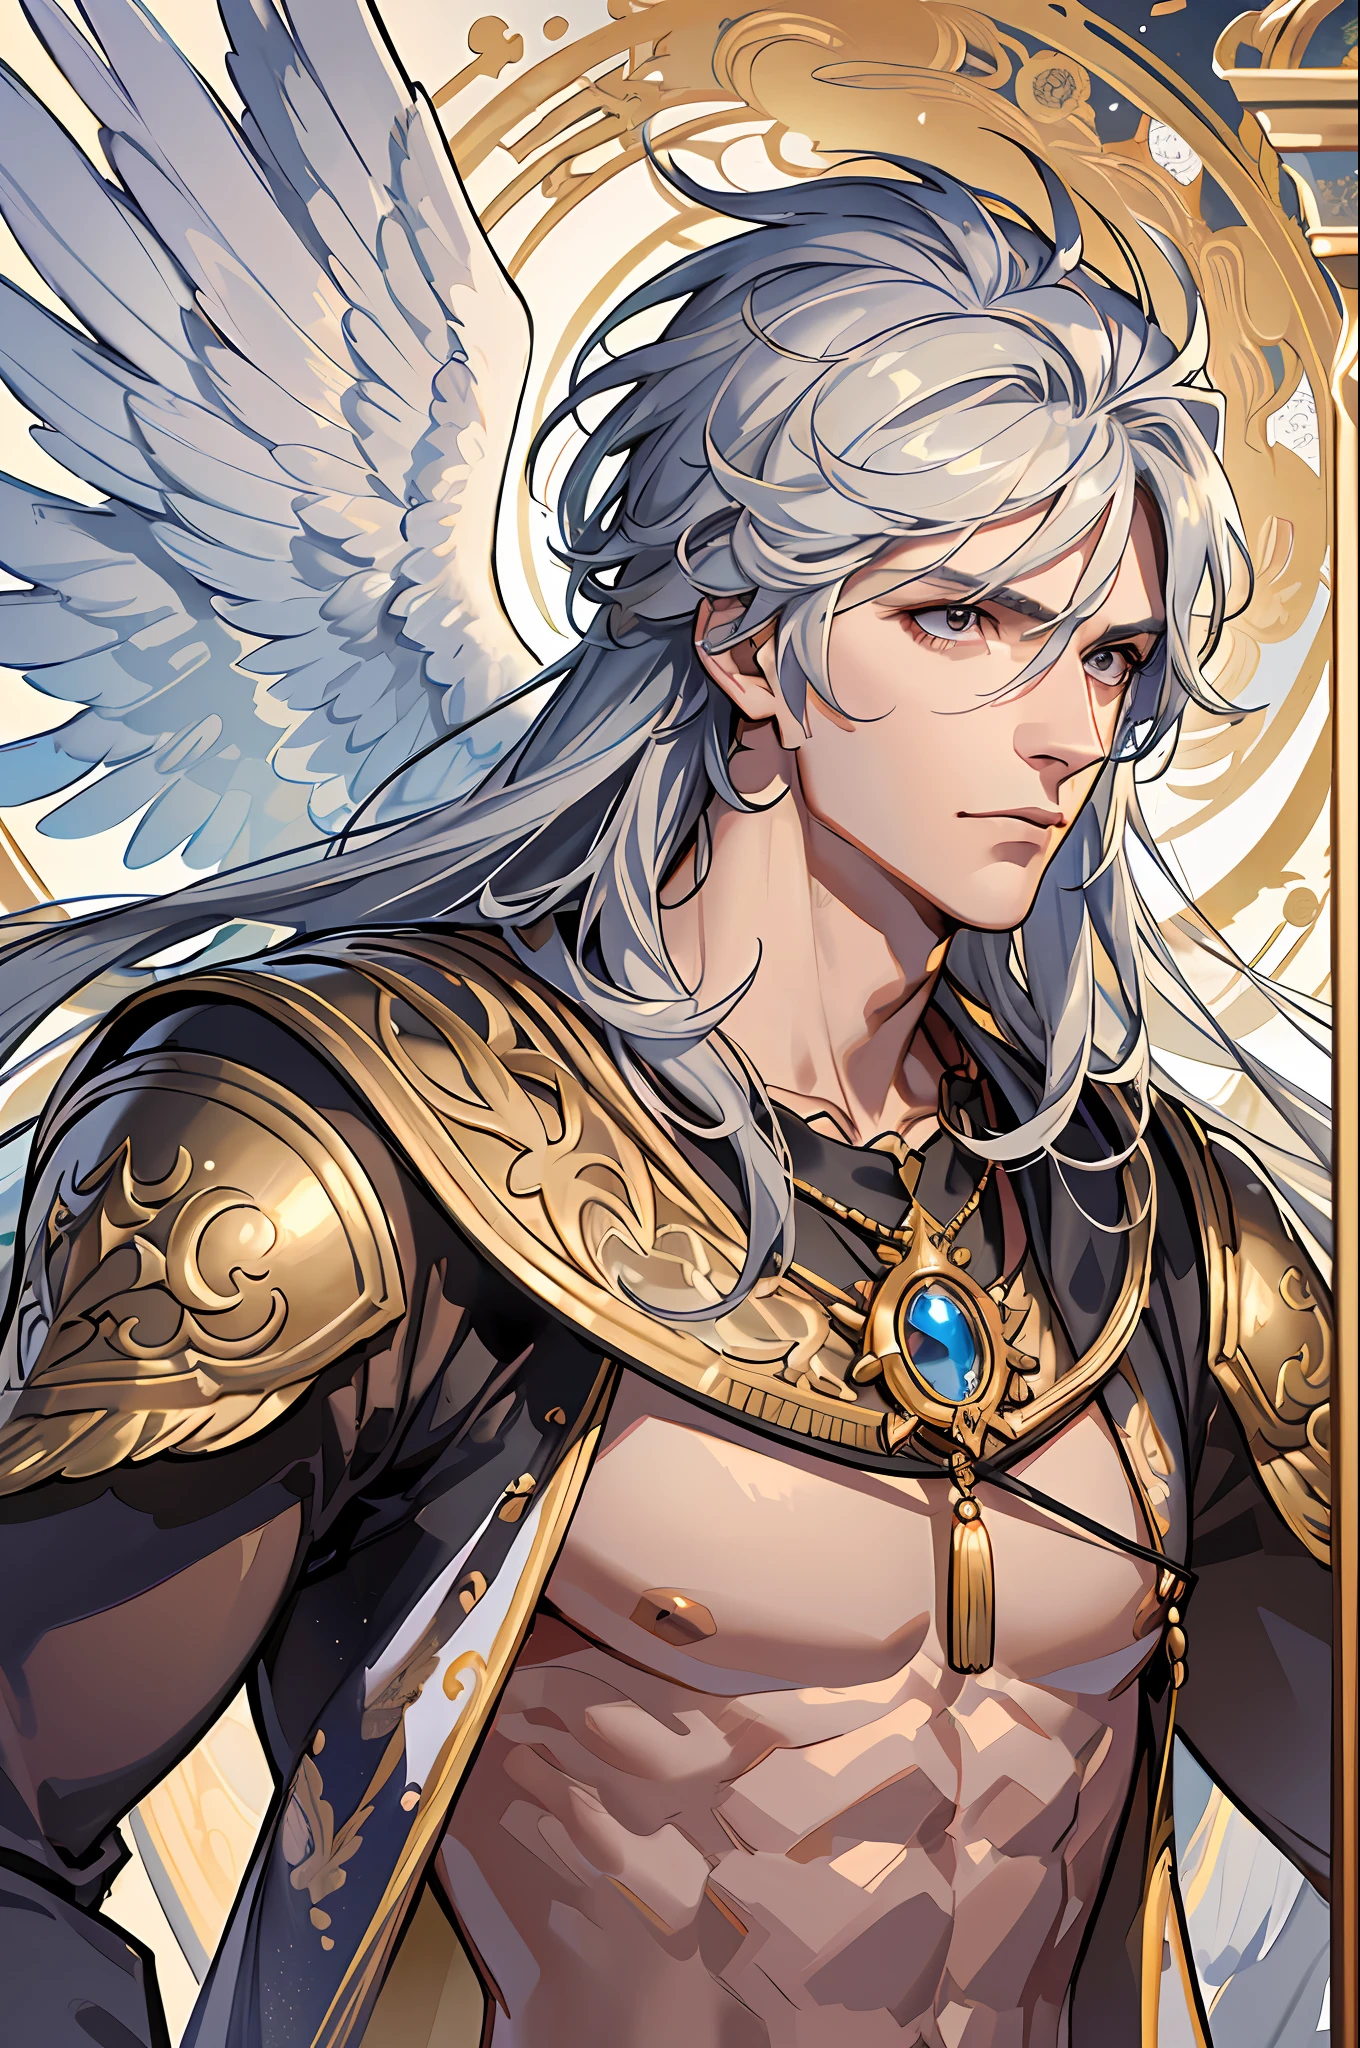 (masterpiece, best quality), 1 male, solo, adult, handsome, tall muscular guy, broad shoulders, finely detailed eyes and detailed face, extremely detailed CG unity 8k wallpaper, intricate details, angelic messenger, feathered wings, celestial realm, divine messages, Grace, Purity, Compassion